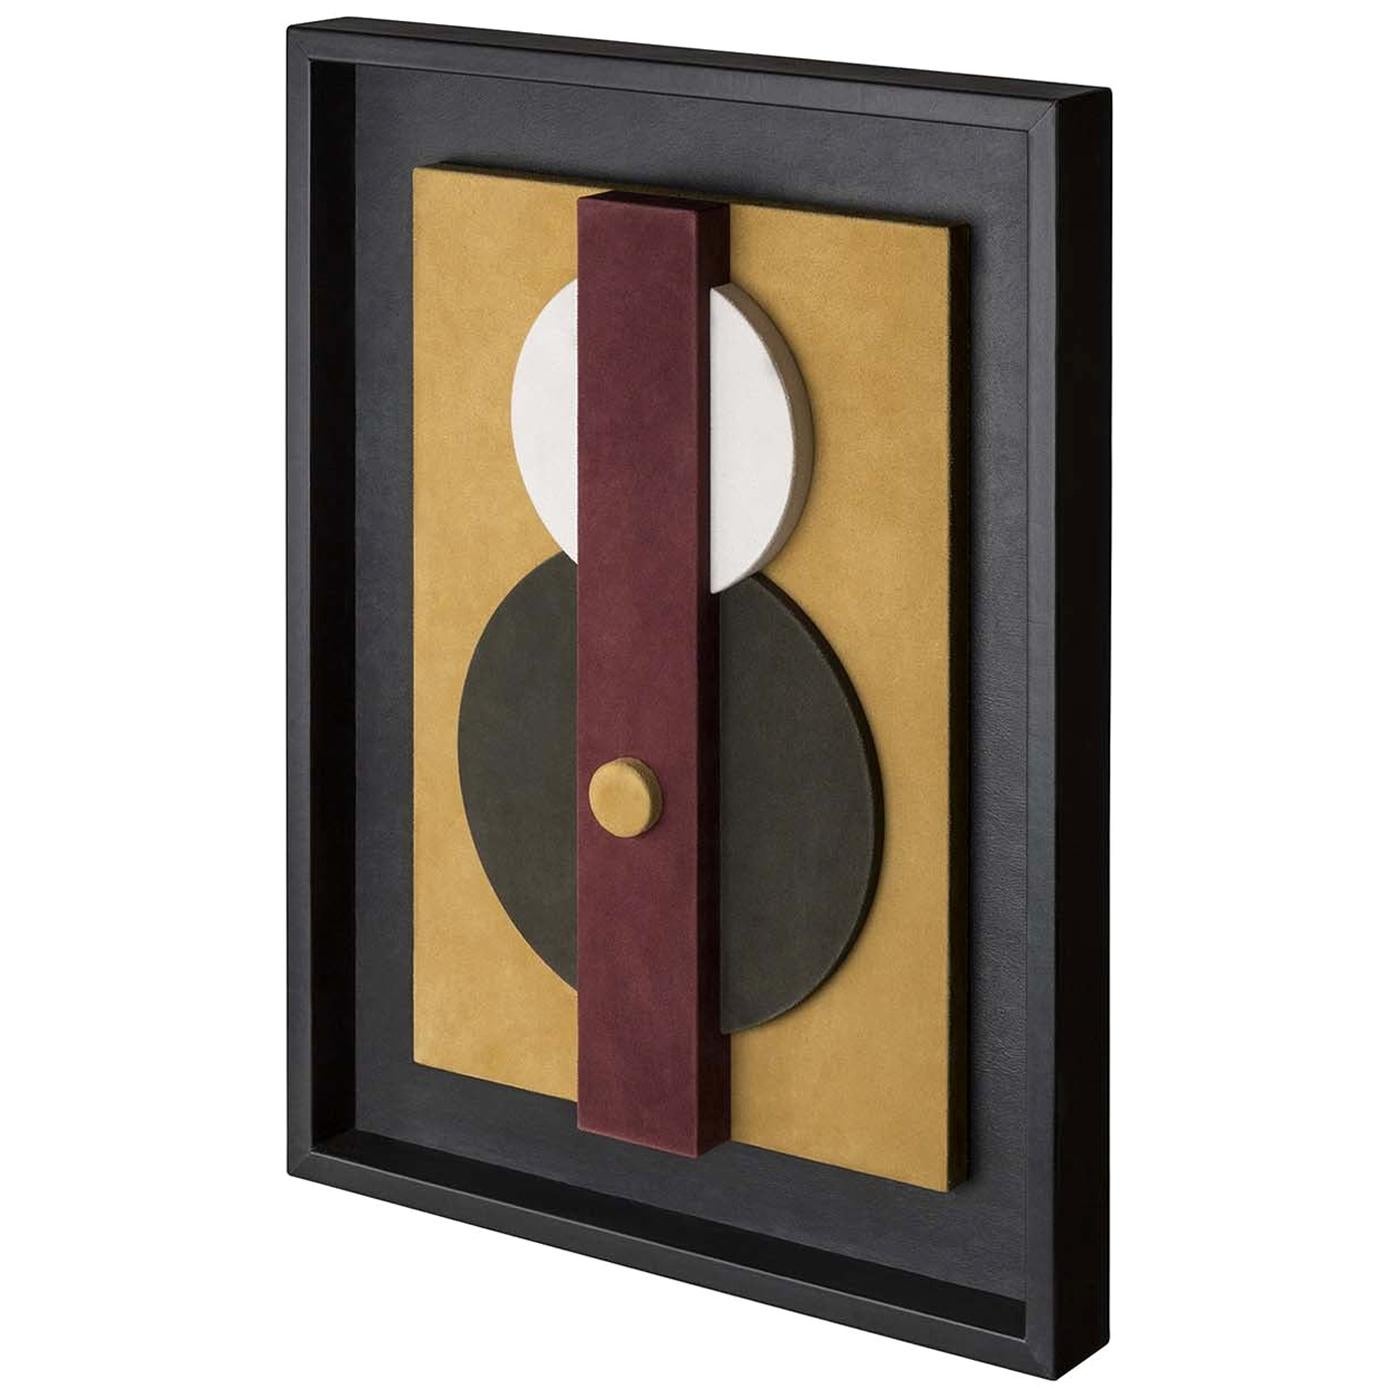 Tabou Decorative Wall Sculpture with Black Frame #1 For Sale